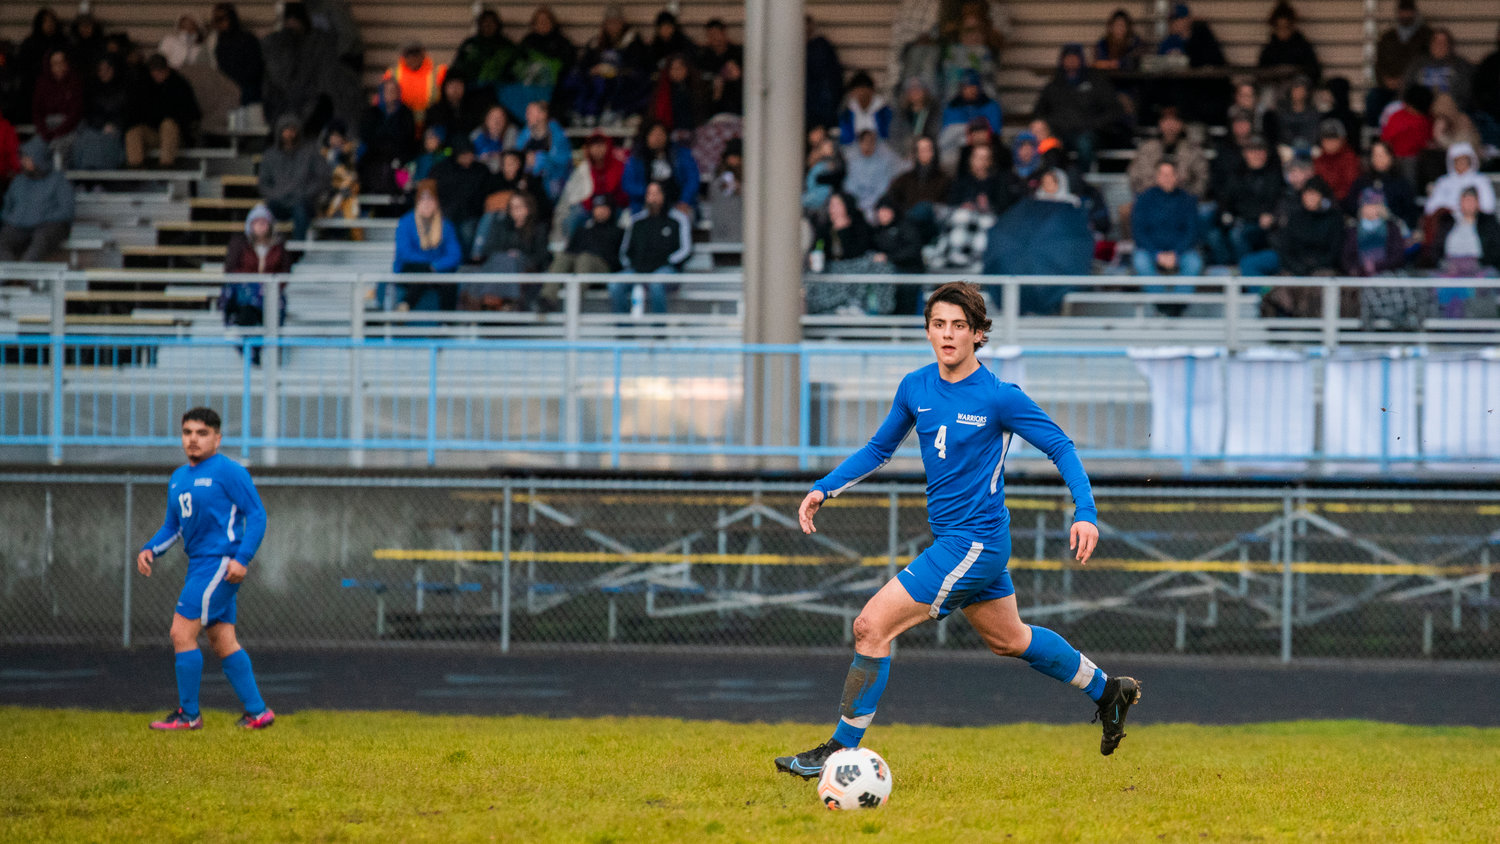 Rochester’s Gabriel Stuard (4) looks upfield to pass during a game on Thursday.